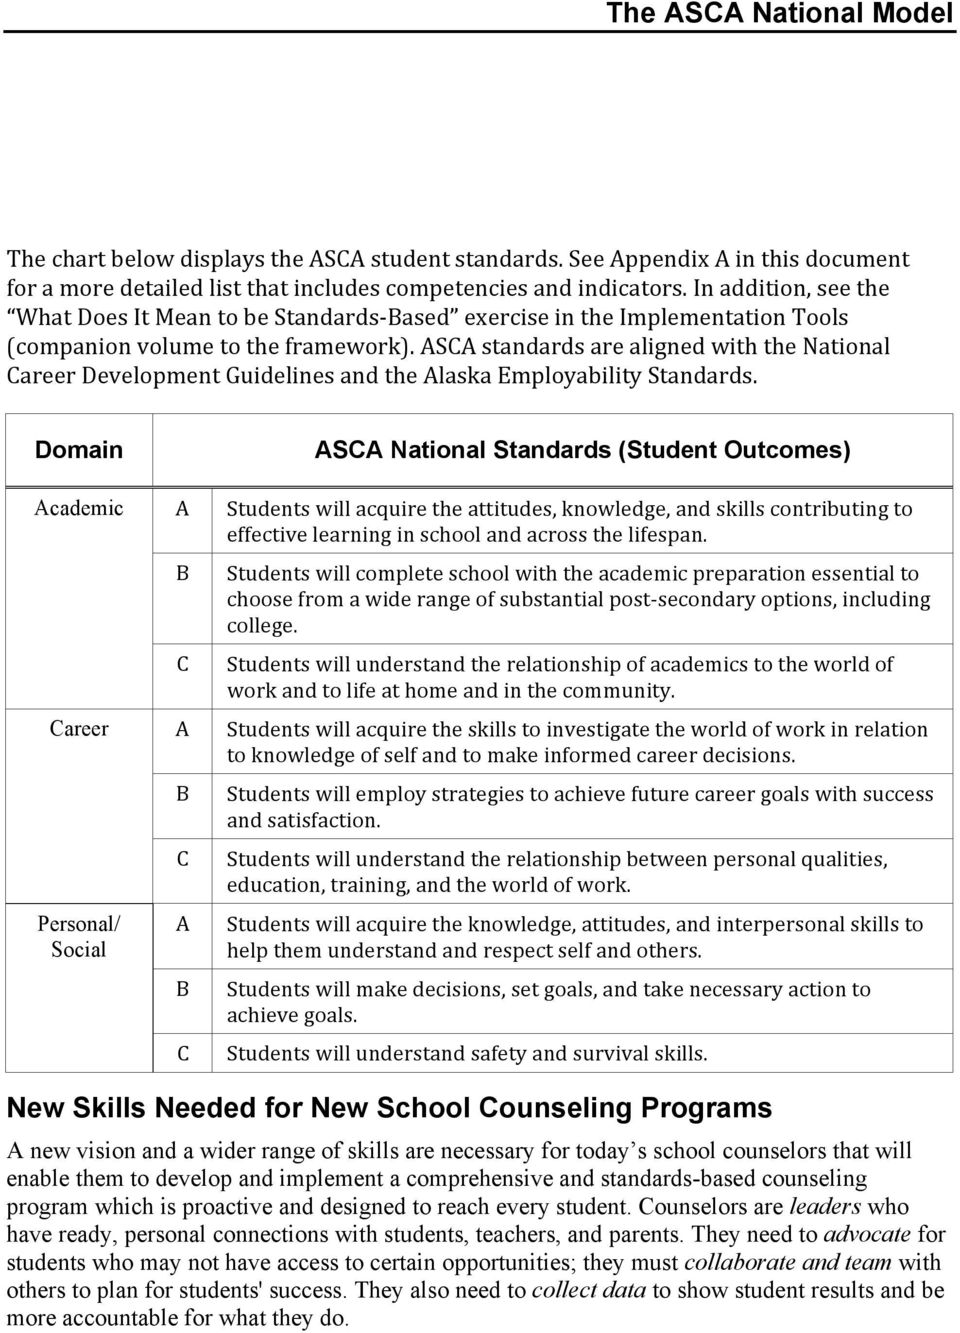 ASCA standards are aligned with the National Career Development Guidelines and the Alaska Employability Standards.